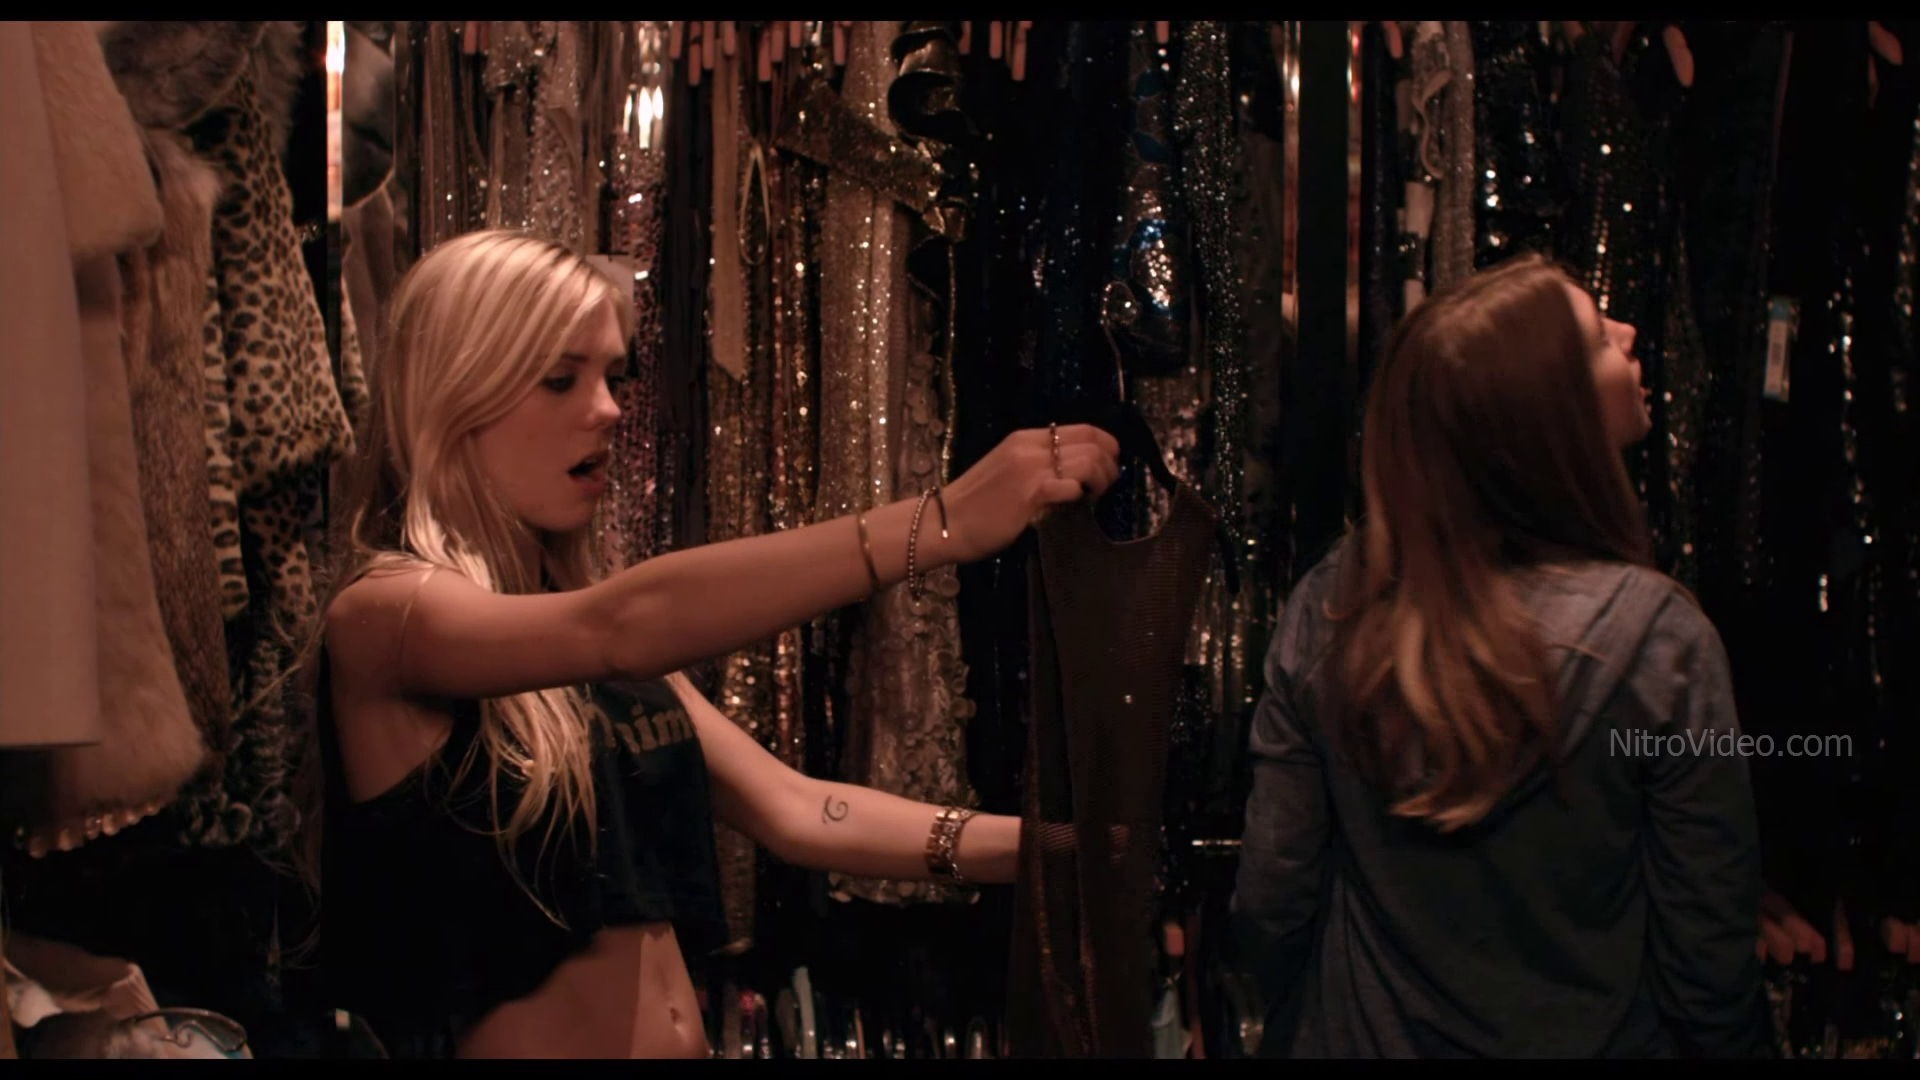 Claire Julien nude or sexy in The Bling Ring Blu-ray - Video Clip #01 